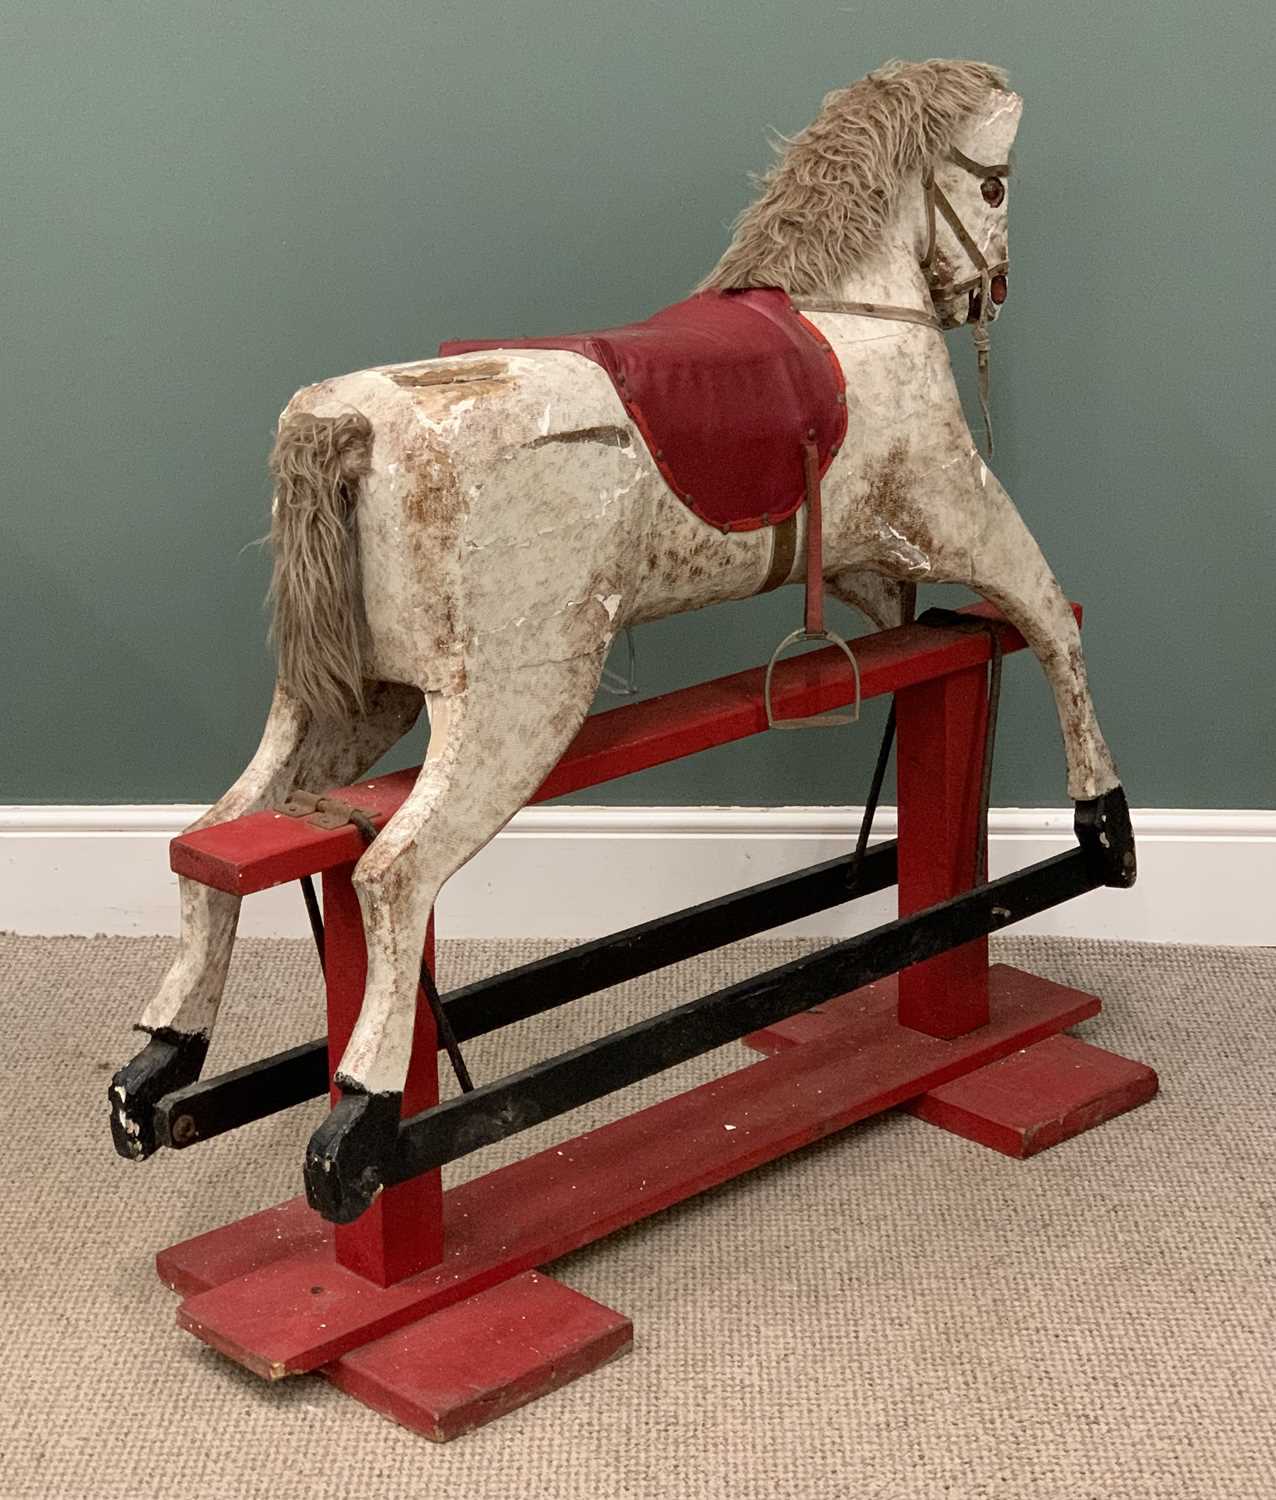 VINTAGE ROCKING HORSE painted white with a red base and saddle, 106 (h) x 116 (w) x 40 (d) cms - Image 3 of 3